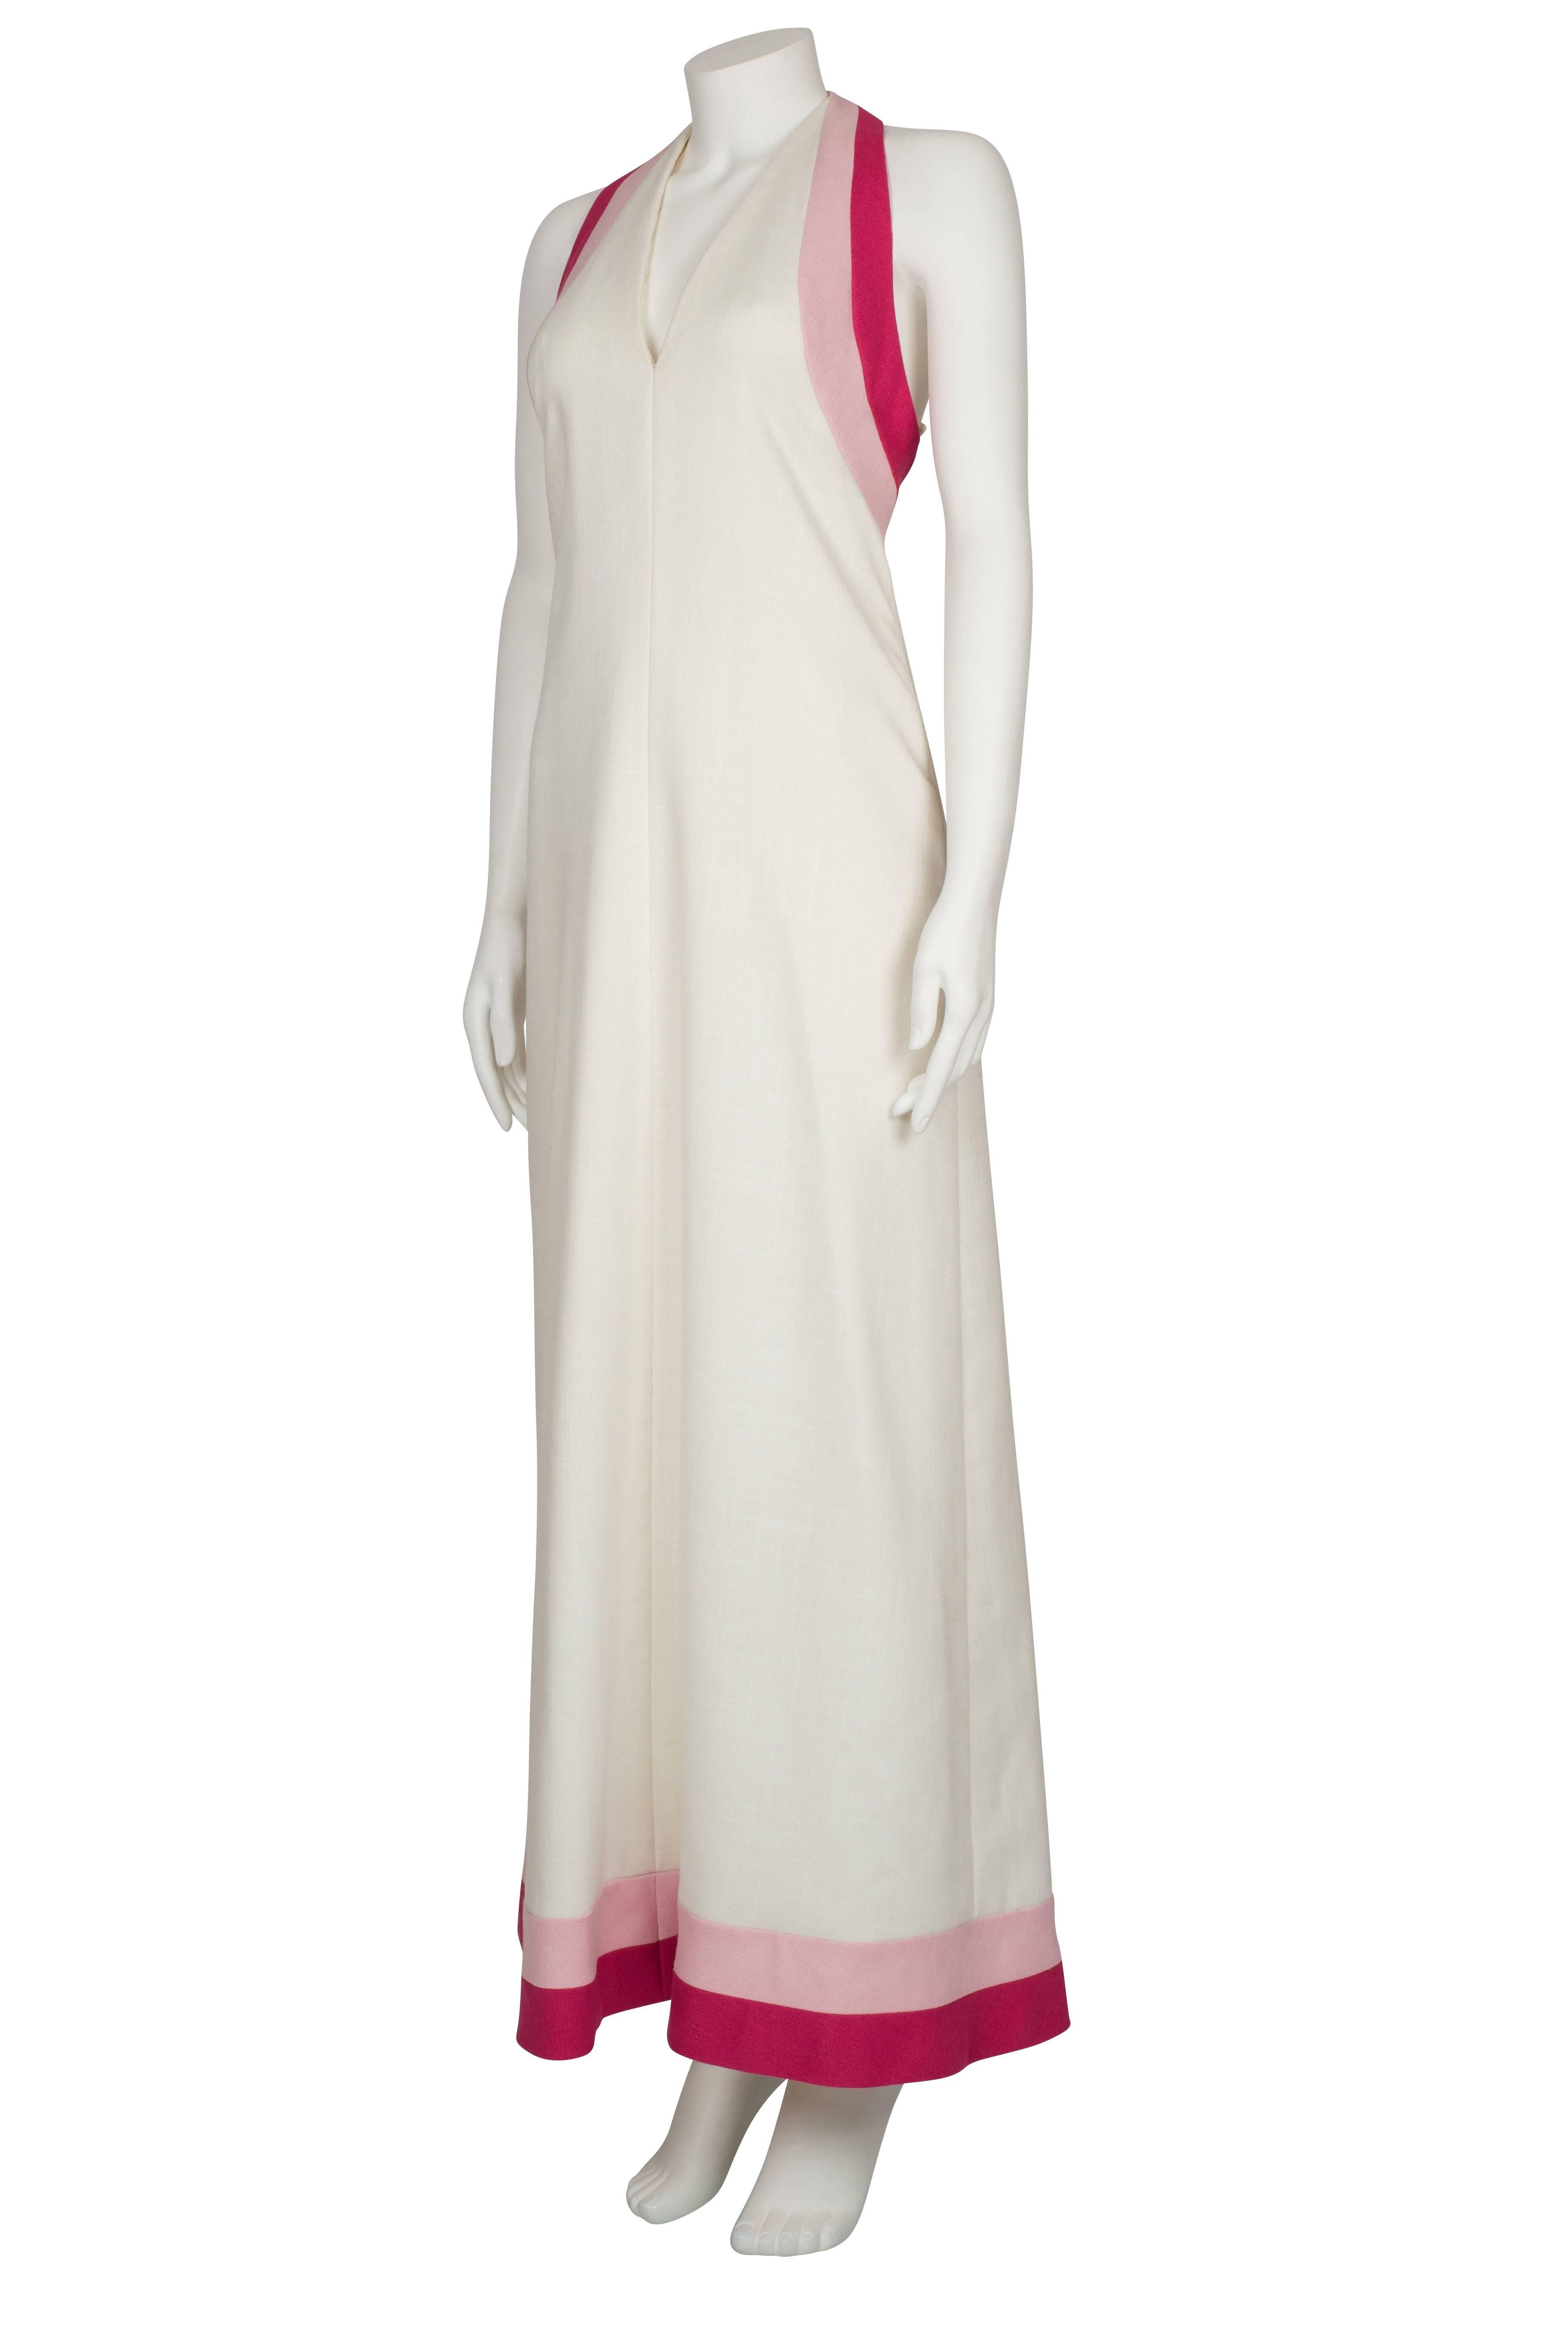 1970's Lord & Taylor White Linen with Pink Halter Gown 1